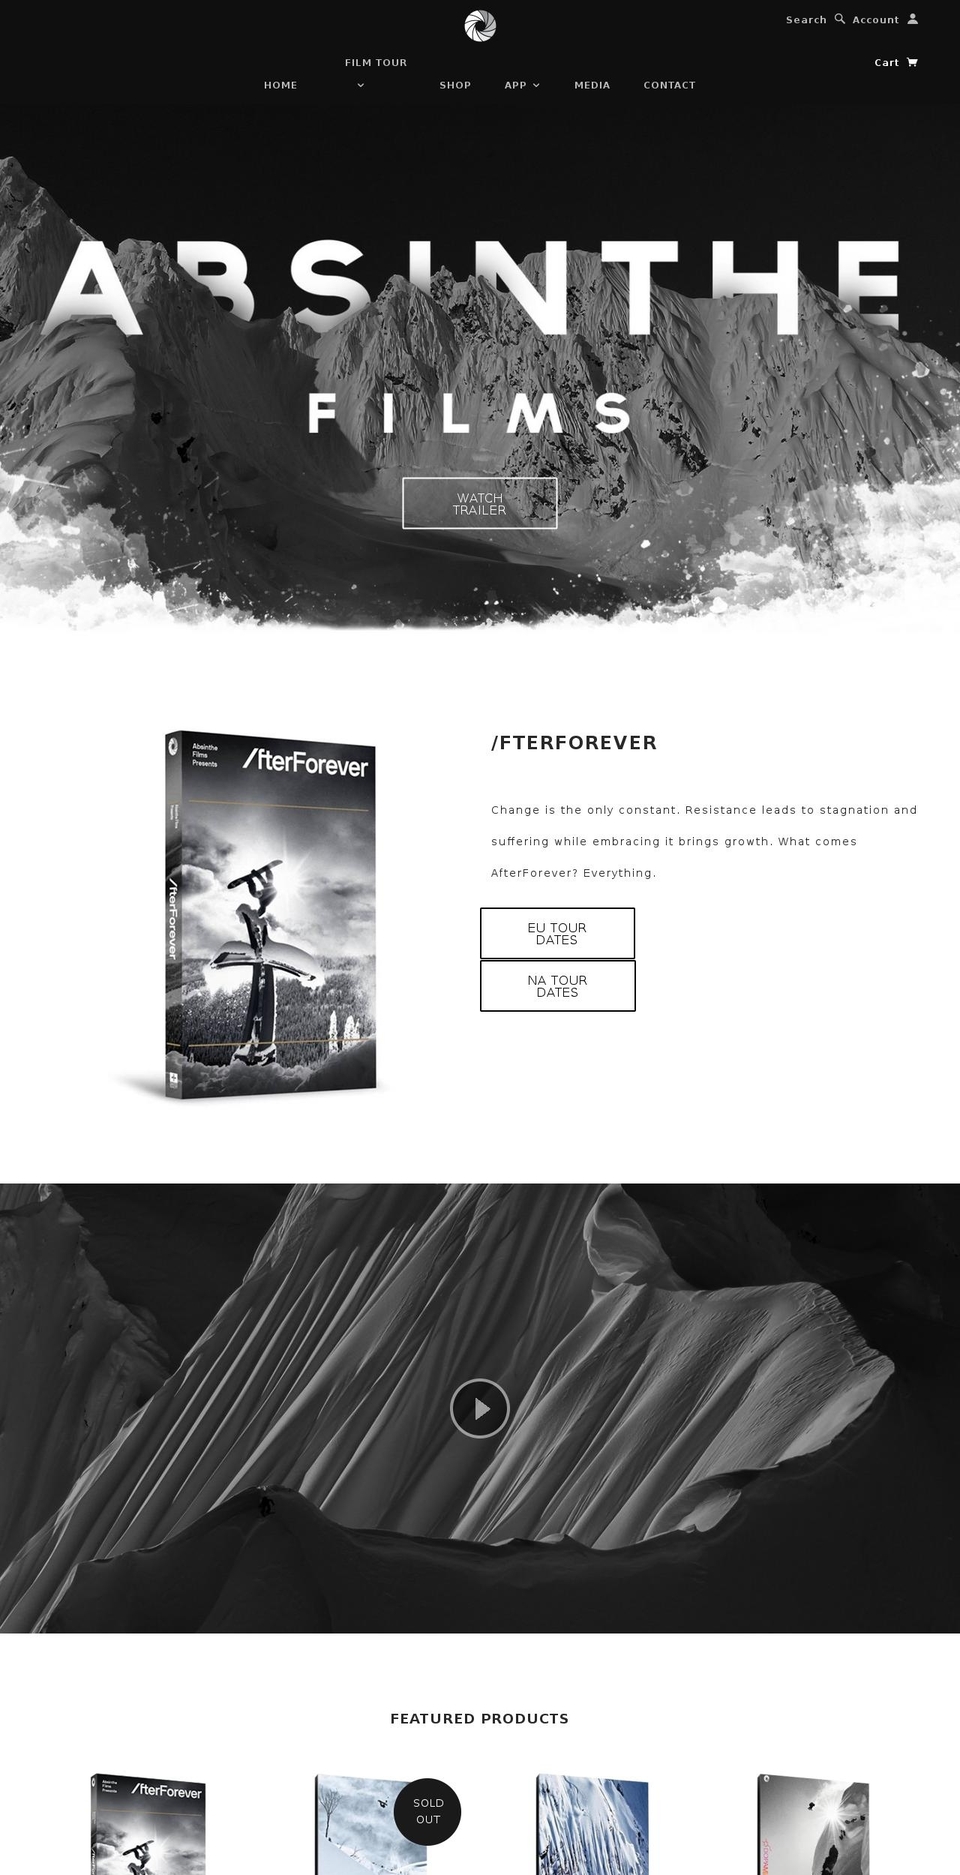 August Shopify theme site example absinthe-films.com